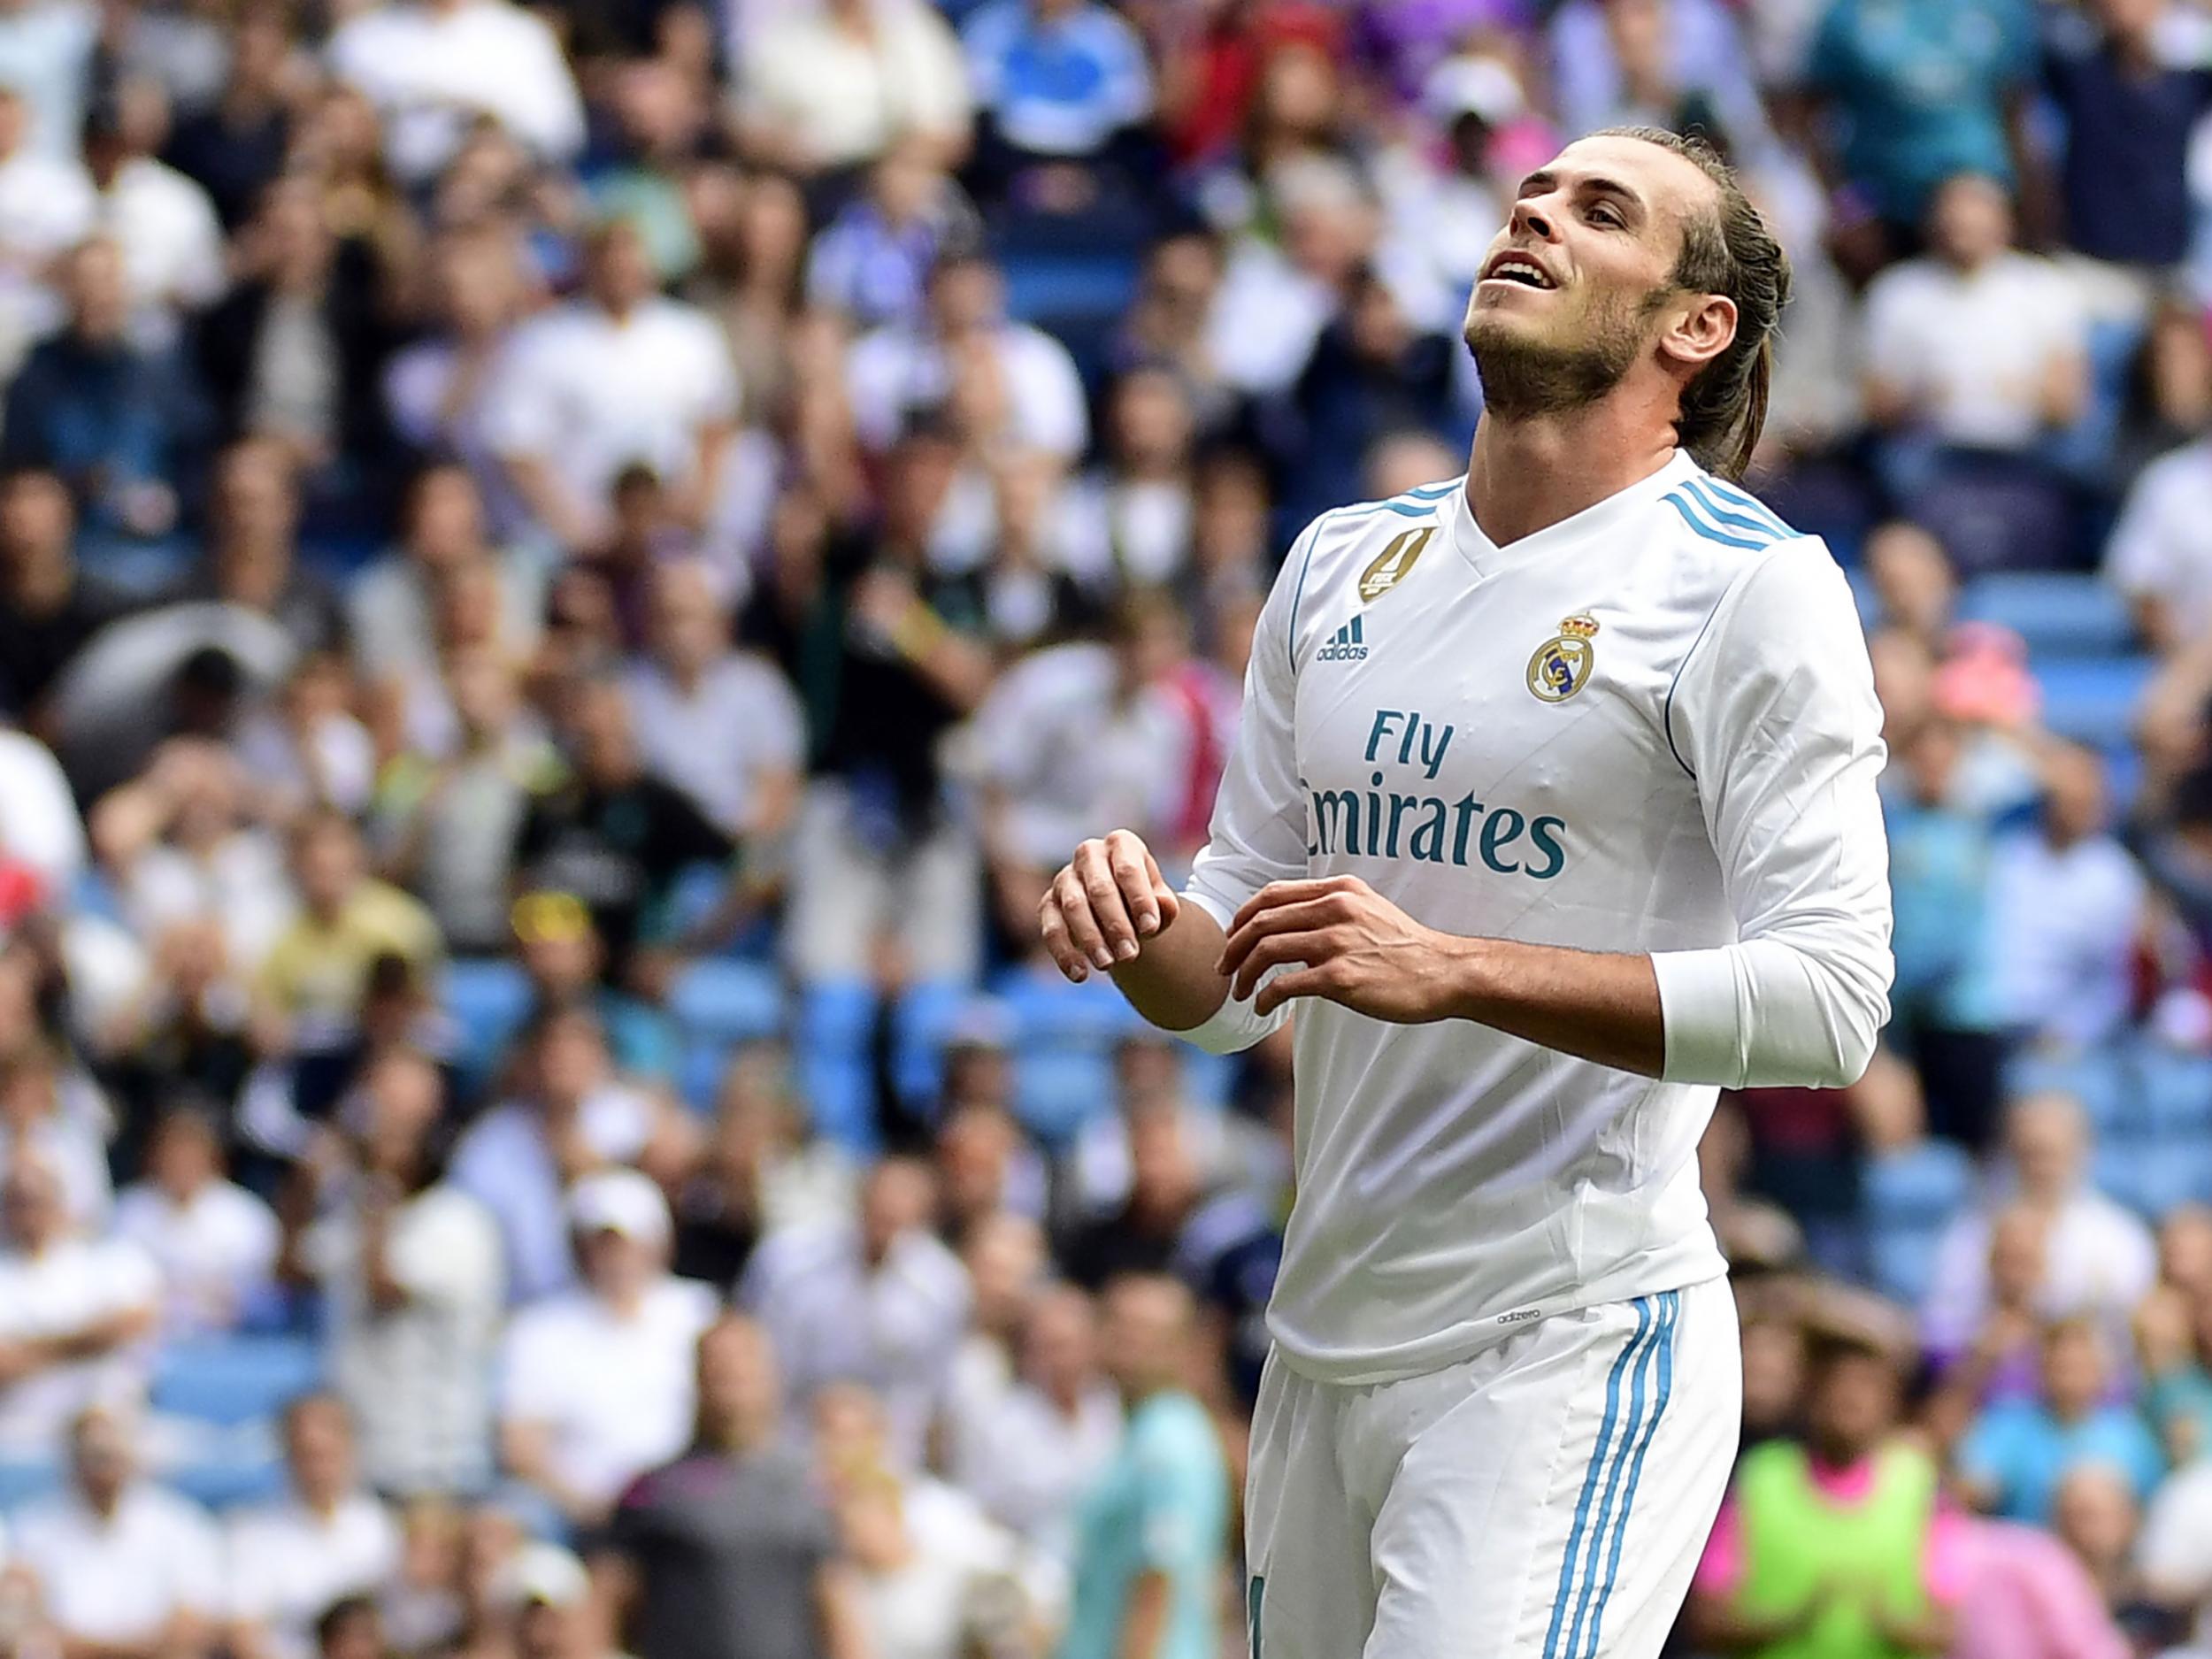 Gareth Bale came off the bench but couldn't help Real Madrid to victory